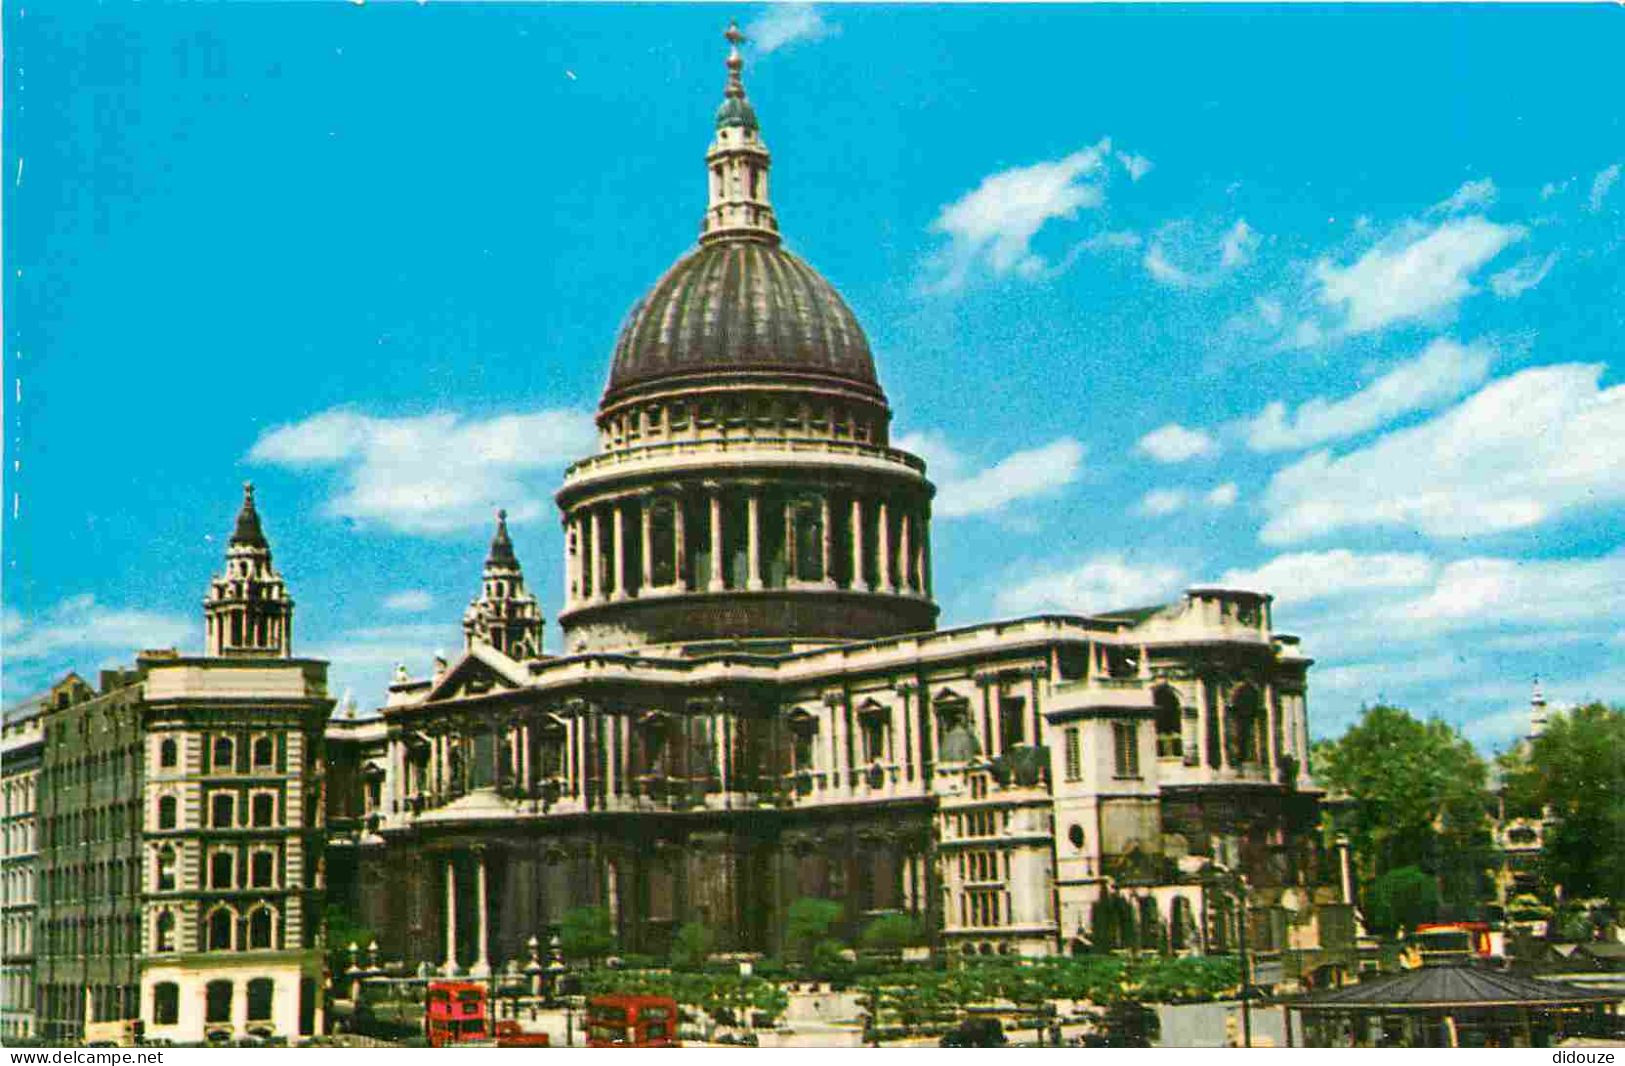 Angleterre - London - St Paul's Cathedral - Cathédrale - London - England - Royaume Uni - UK - United Kingdom - CPM Form - St. Paul's Cathedral